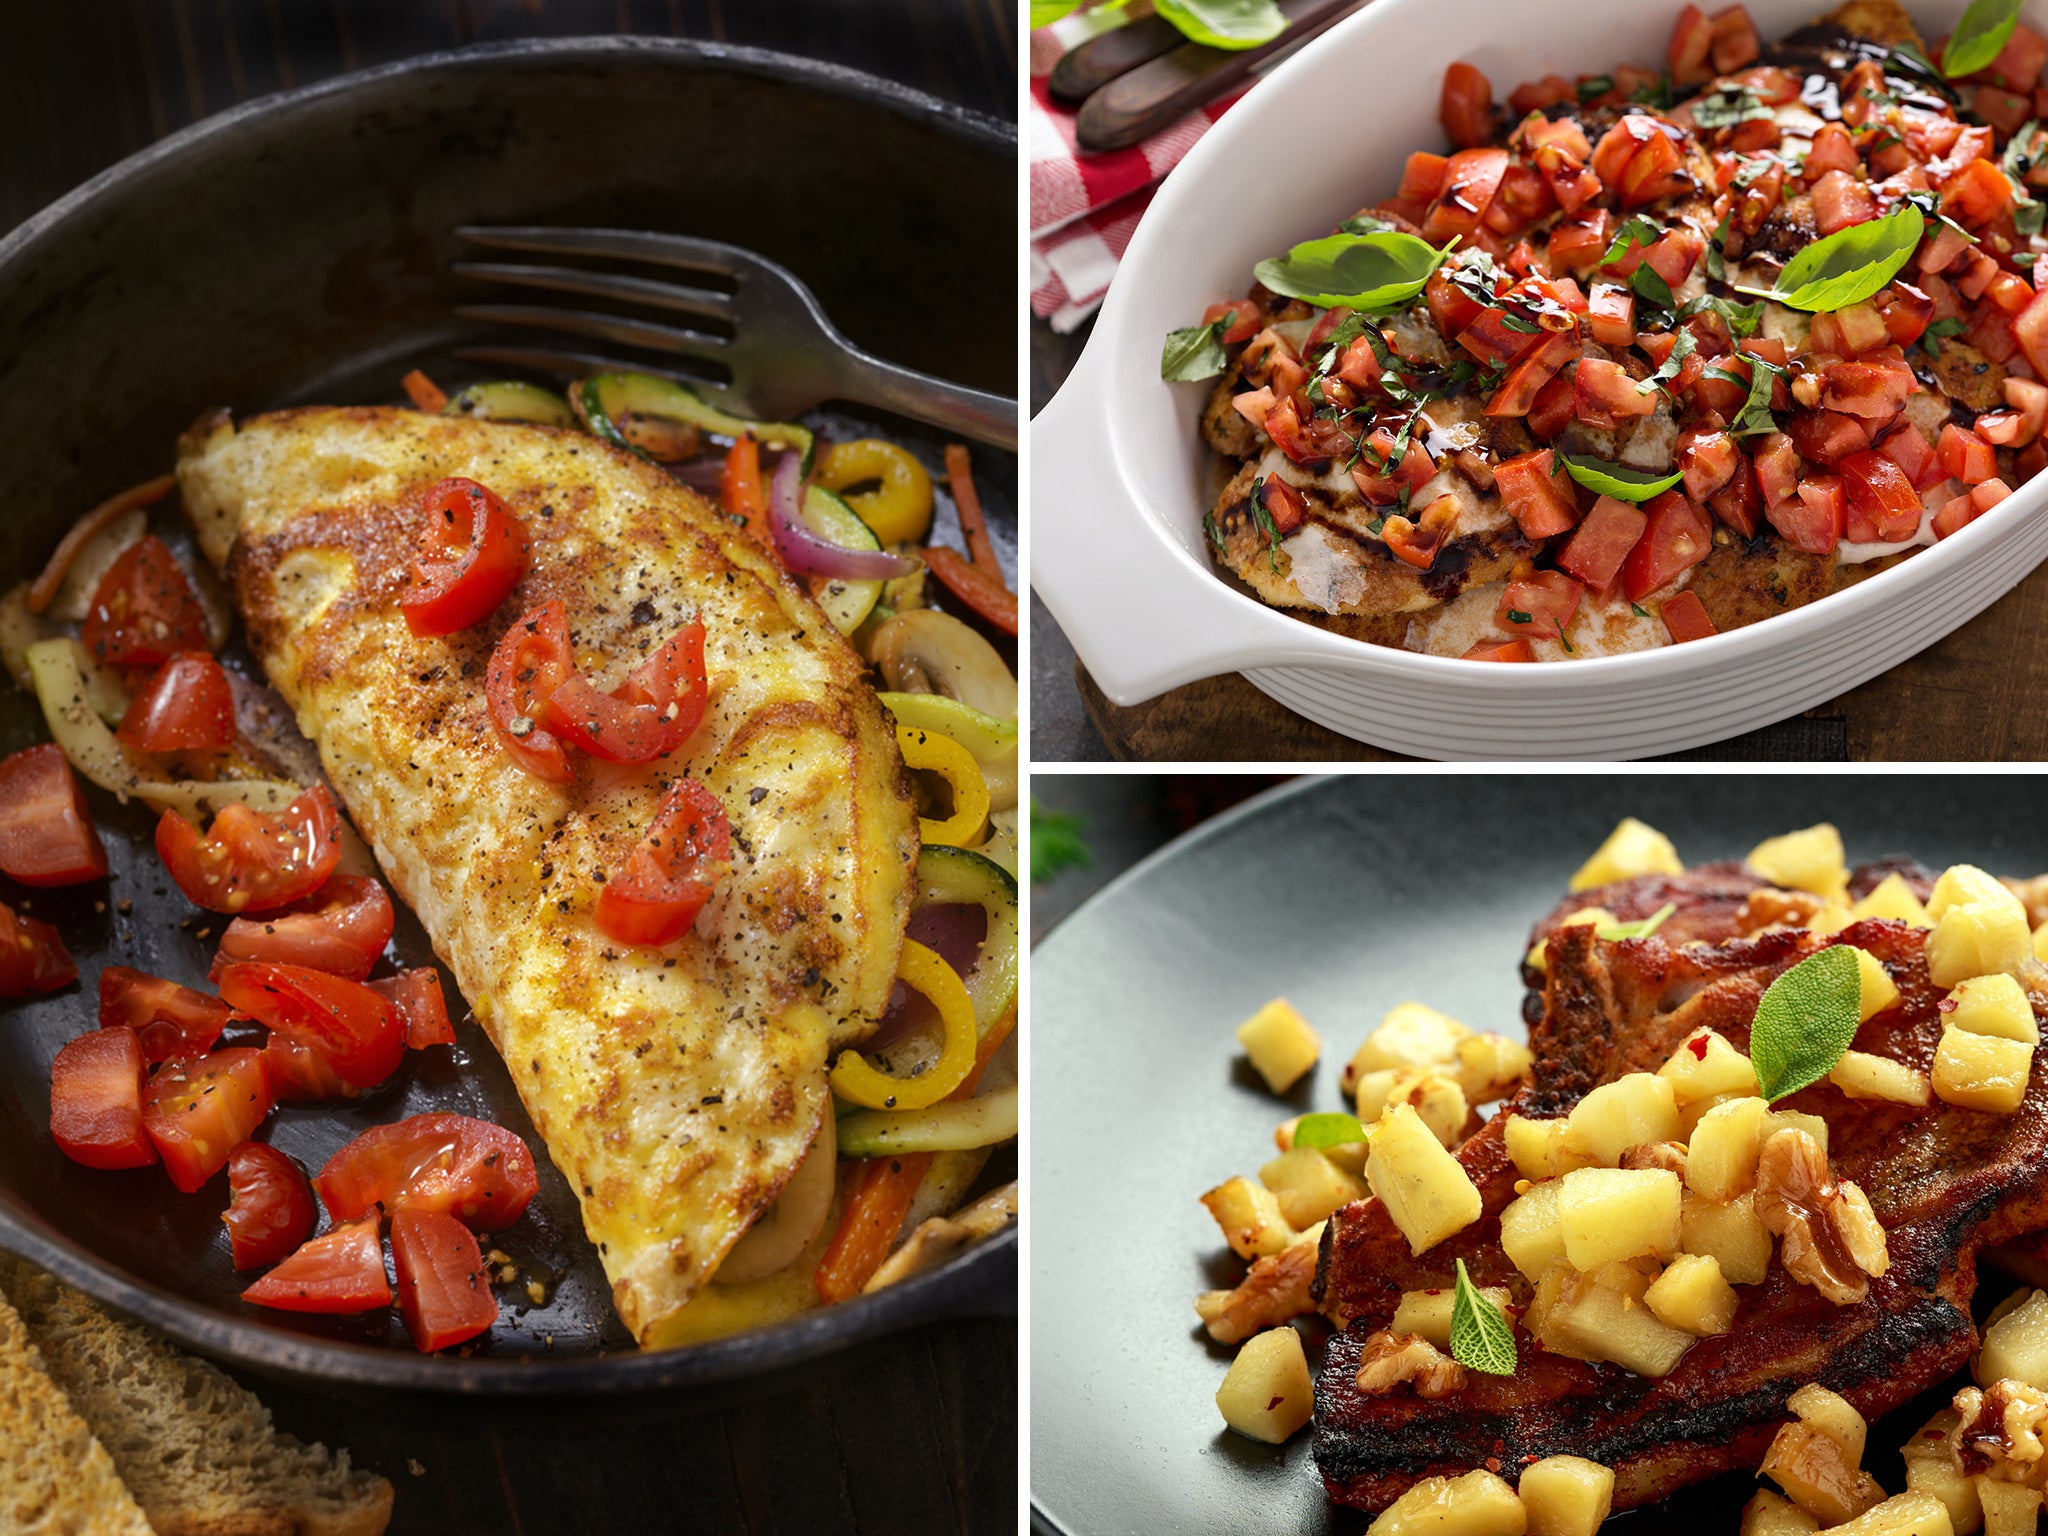 Today’s meal plan is all about bright and bold summer flavours